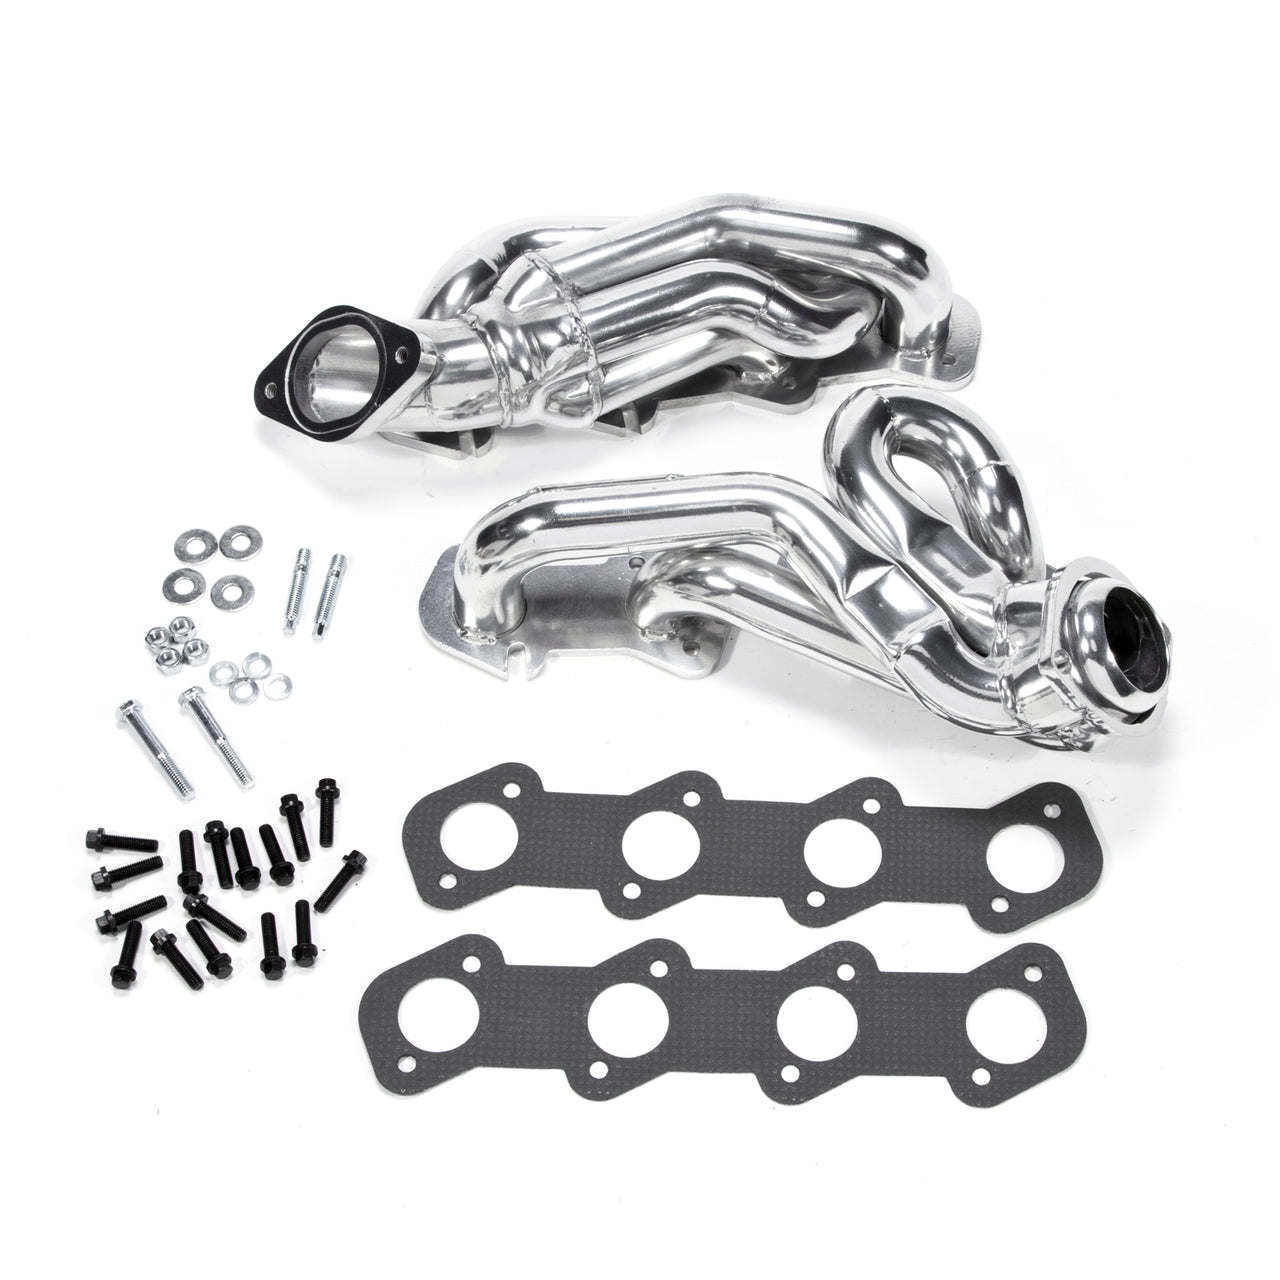 1996-2004 MUSTANG GT 1-5/8 SHORTY TUNED LENGTH HEADERS (POLISHED SILVER CERAMIC)